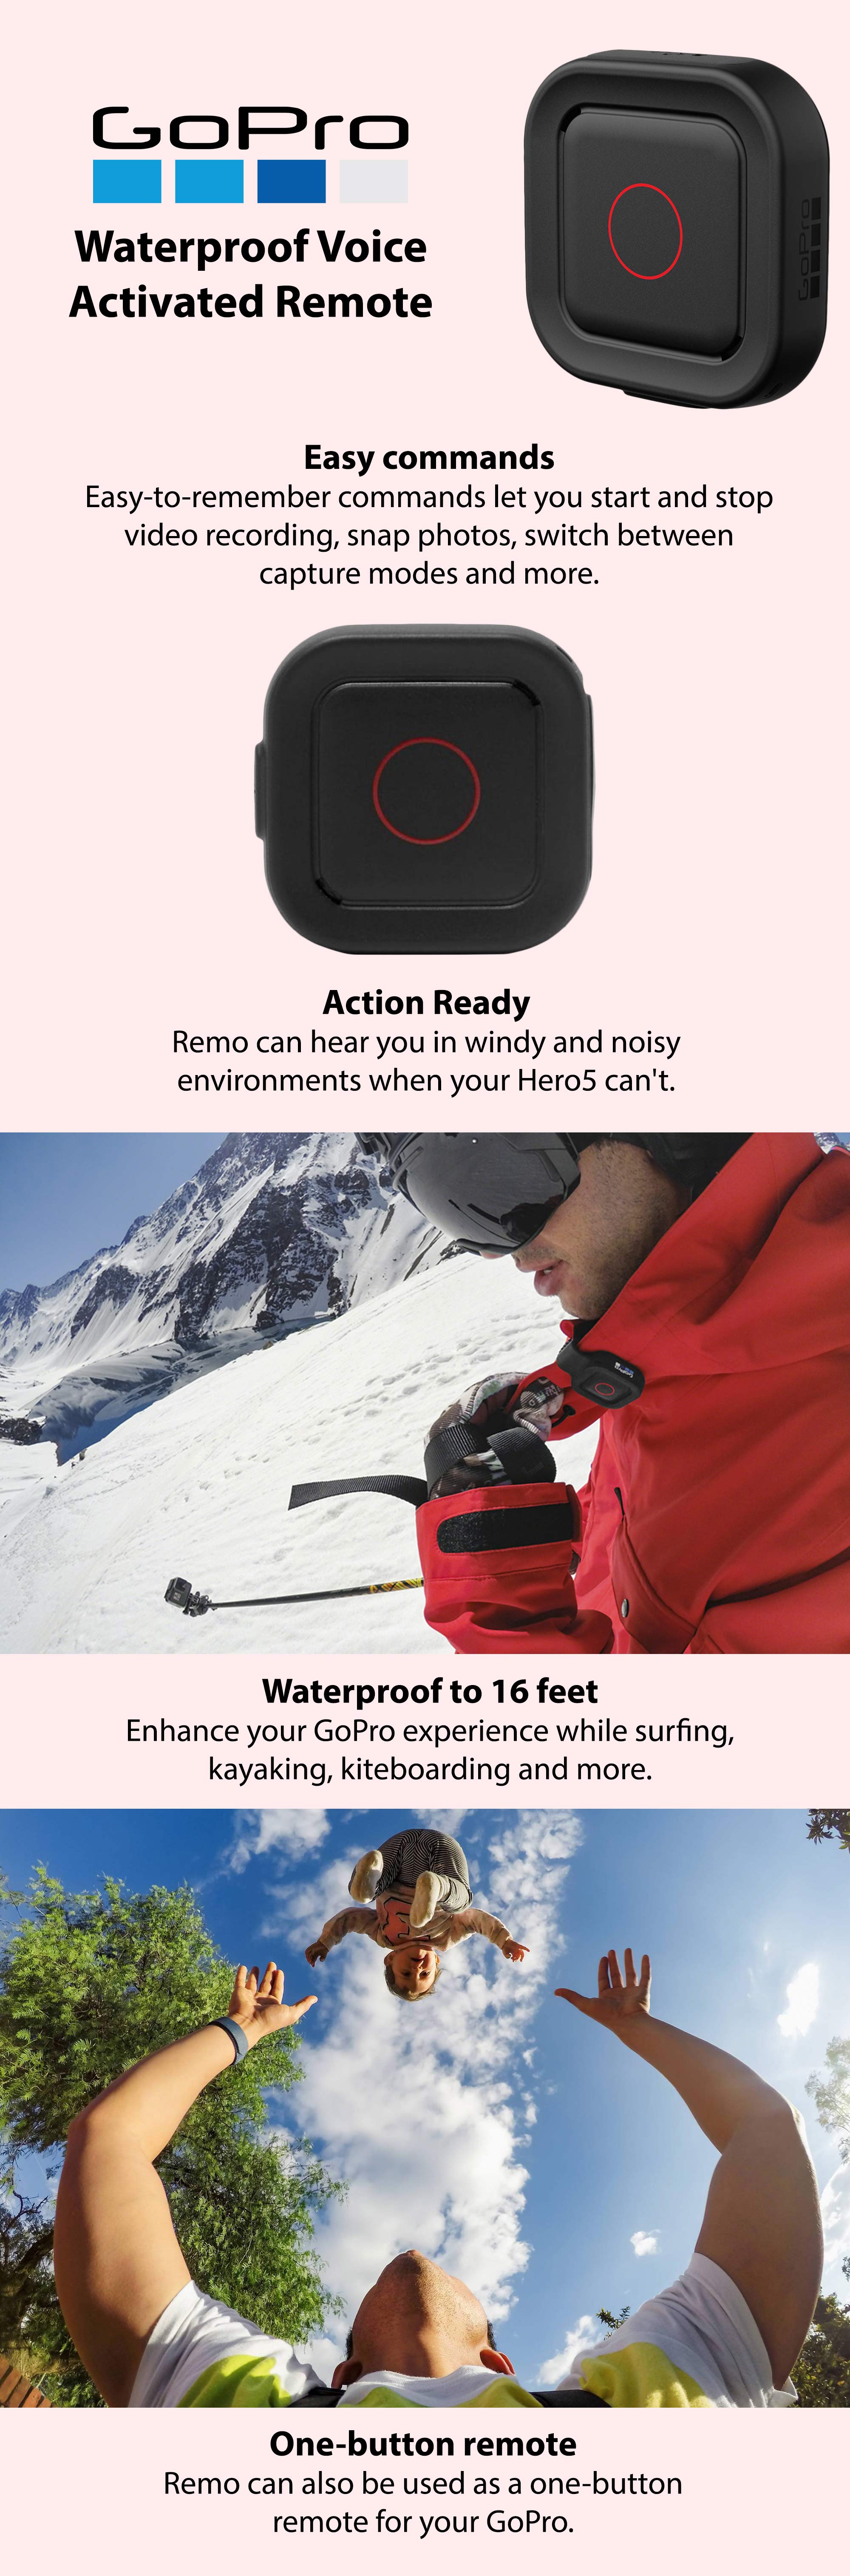 Waterproof Voice Activated Remote Black